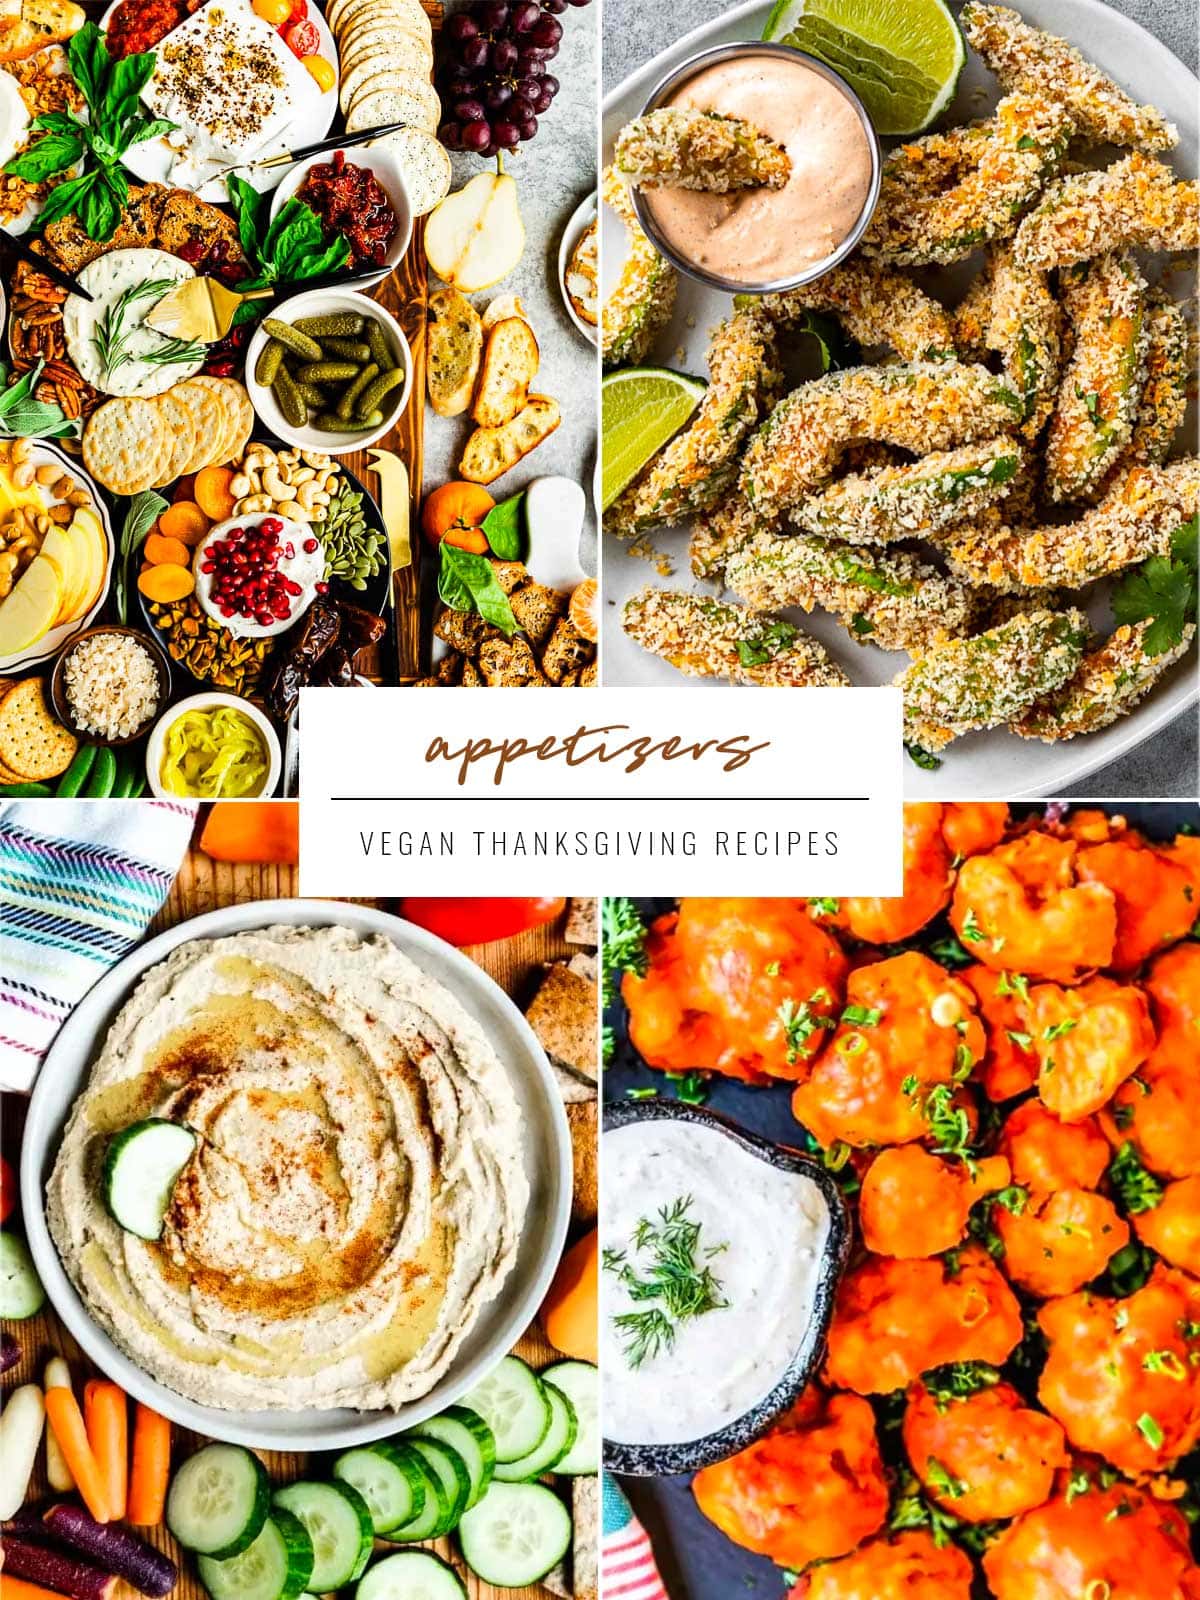 4 photos together with the word appetizers for Vegan Thanksgiving Recipes written over top. Recipe images include vegan charcuterie board, avocado fries, hummus and cauliflower wings.